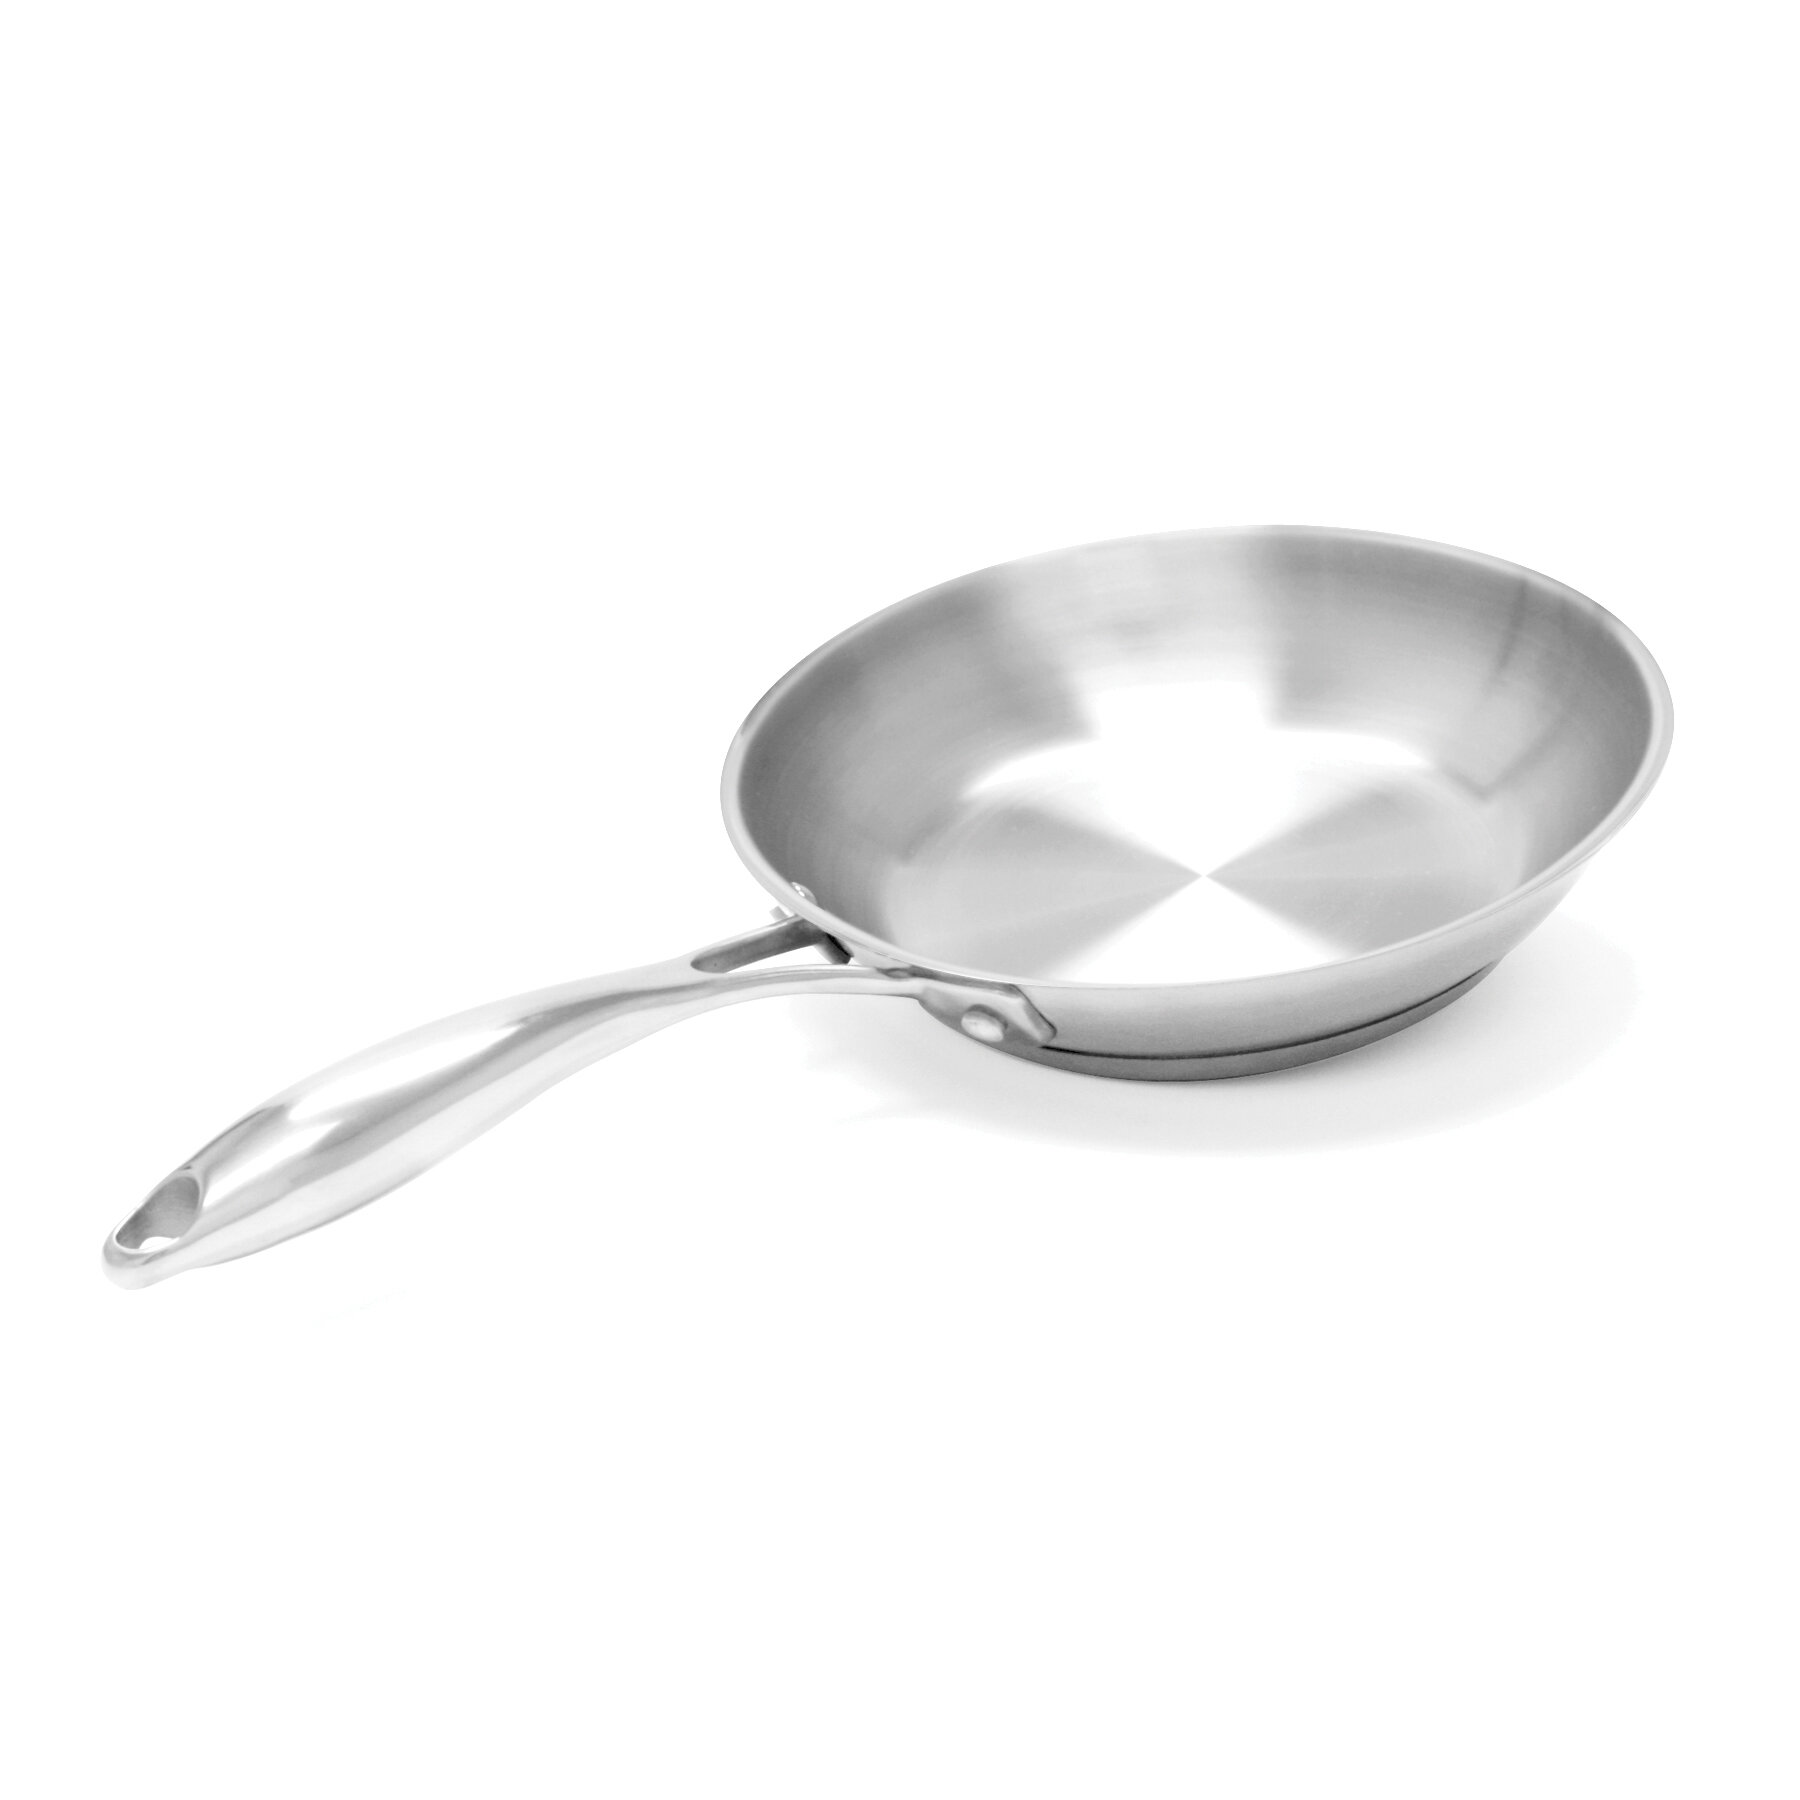 Chantal Induction 21 Steel 10 Fry Pan with Ceramic Coating